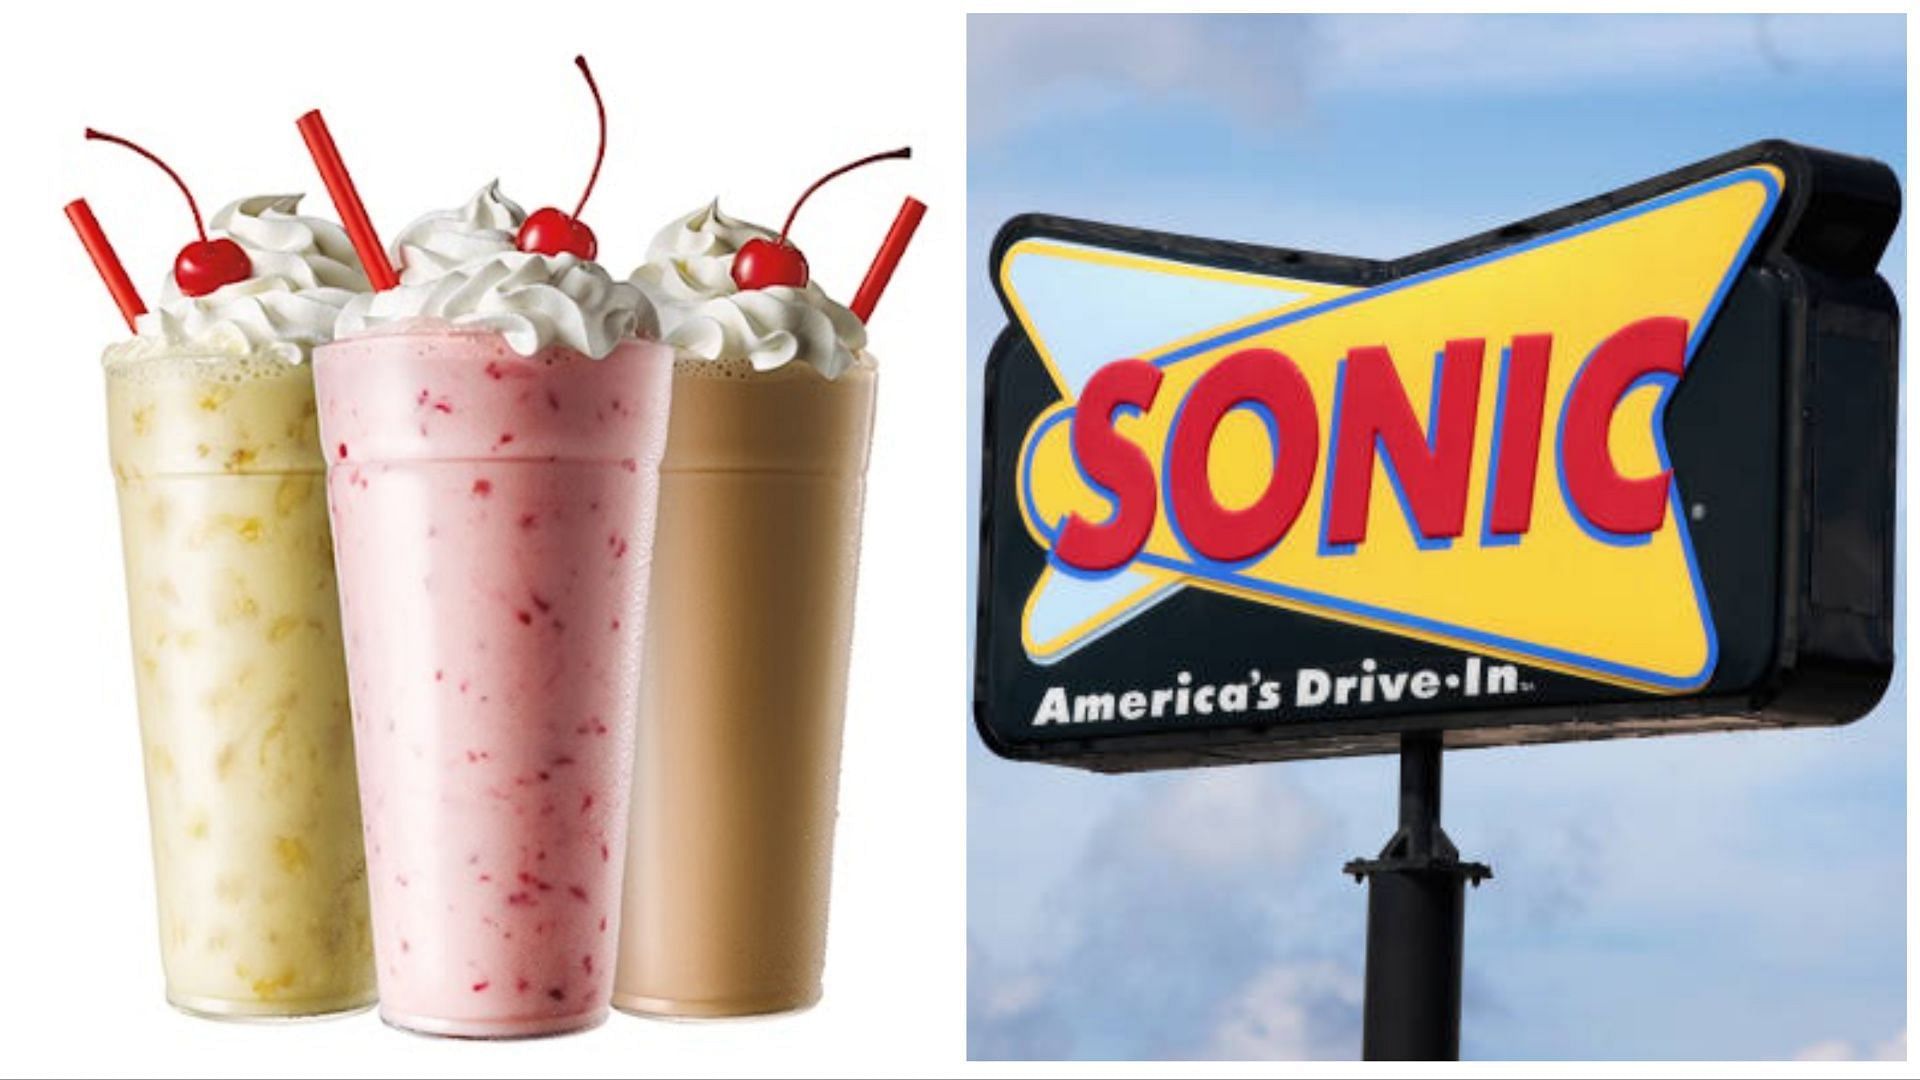 You Can Buy the Ice at Sonic for $2